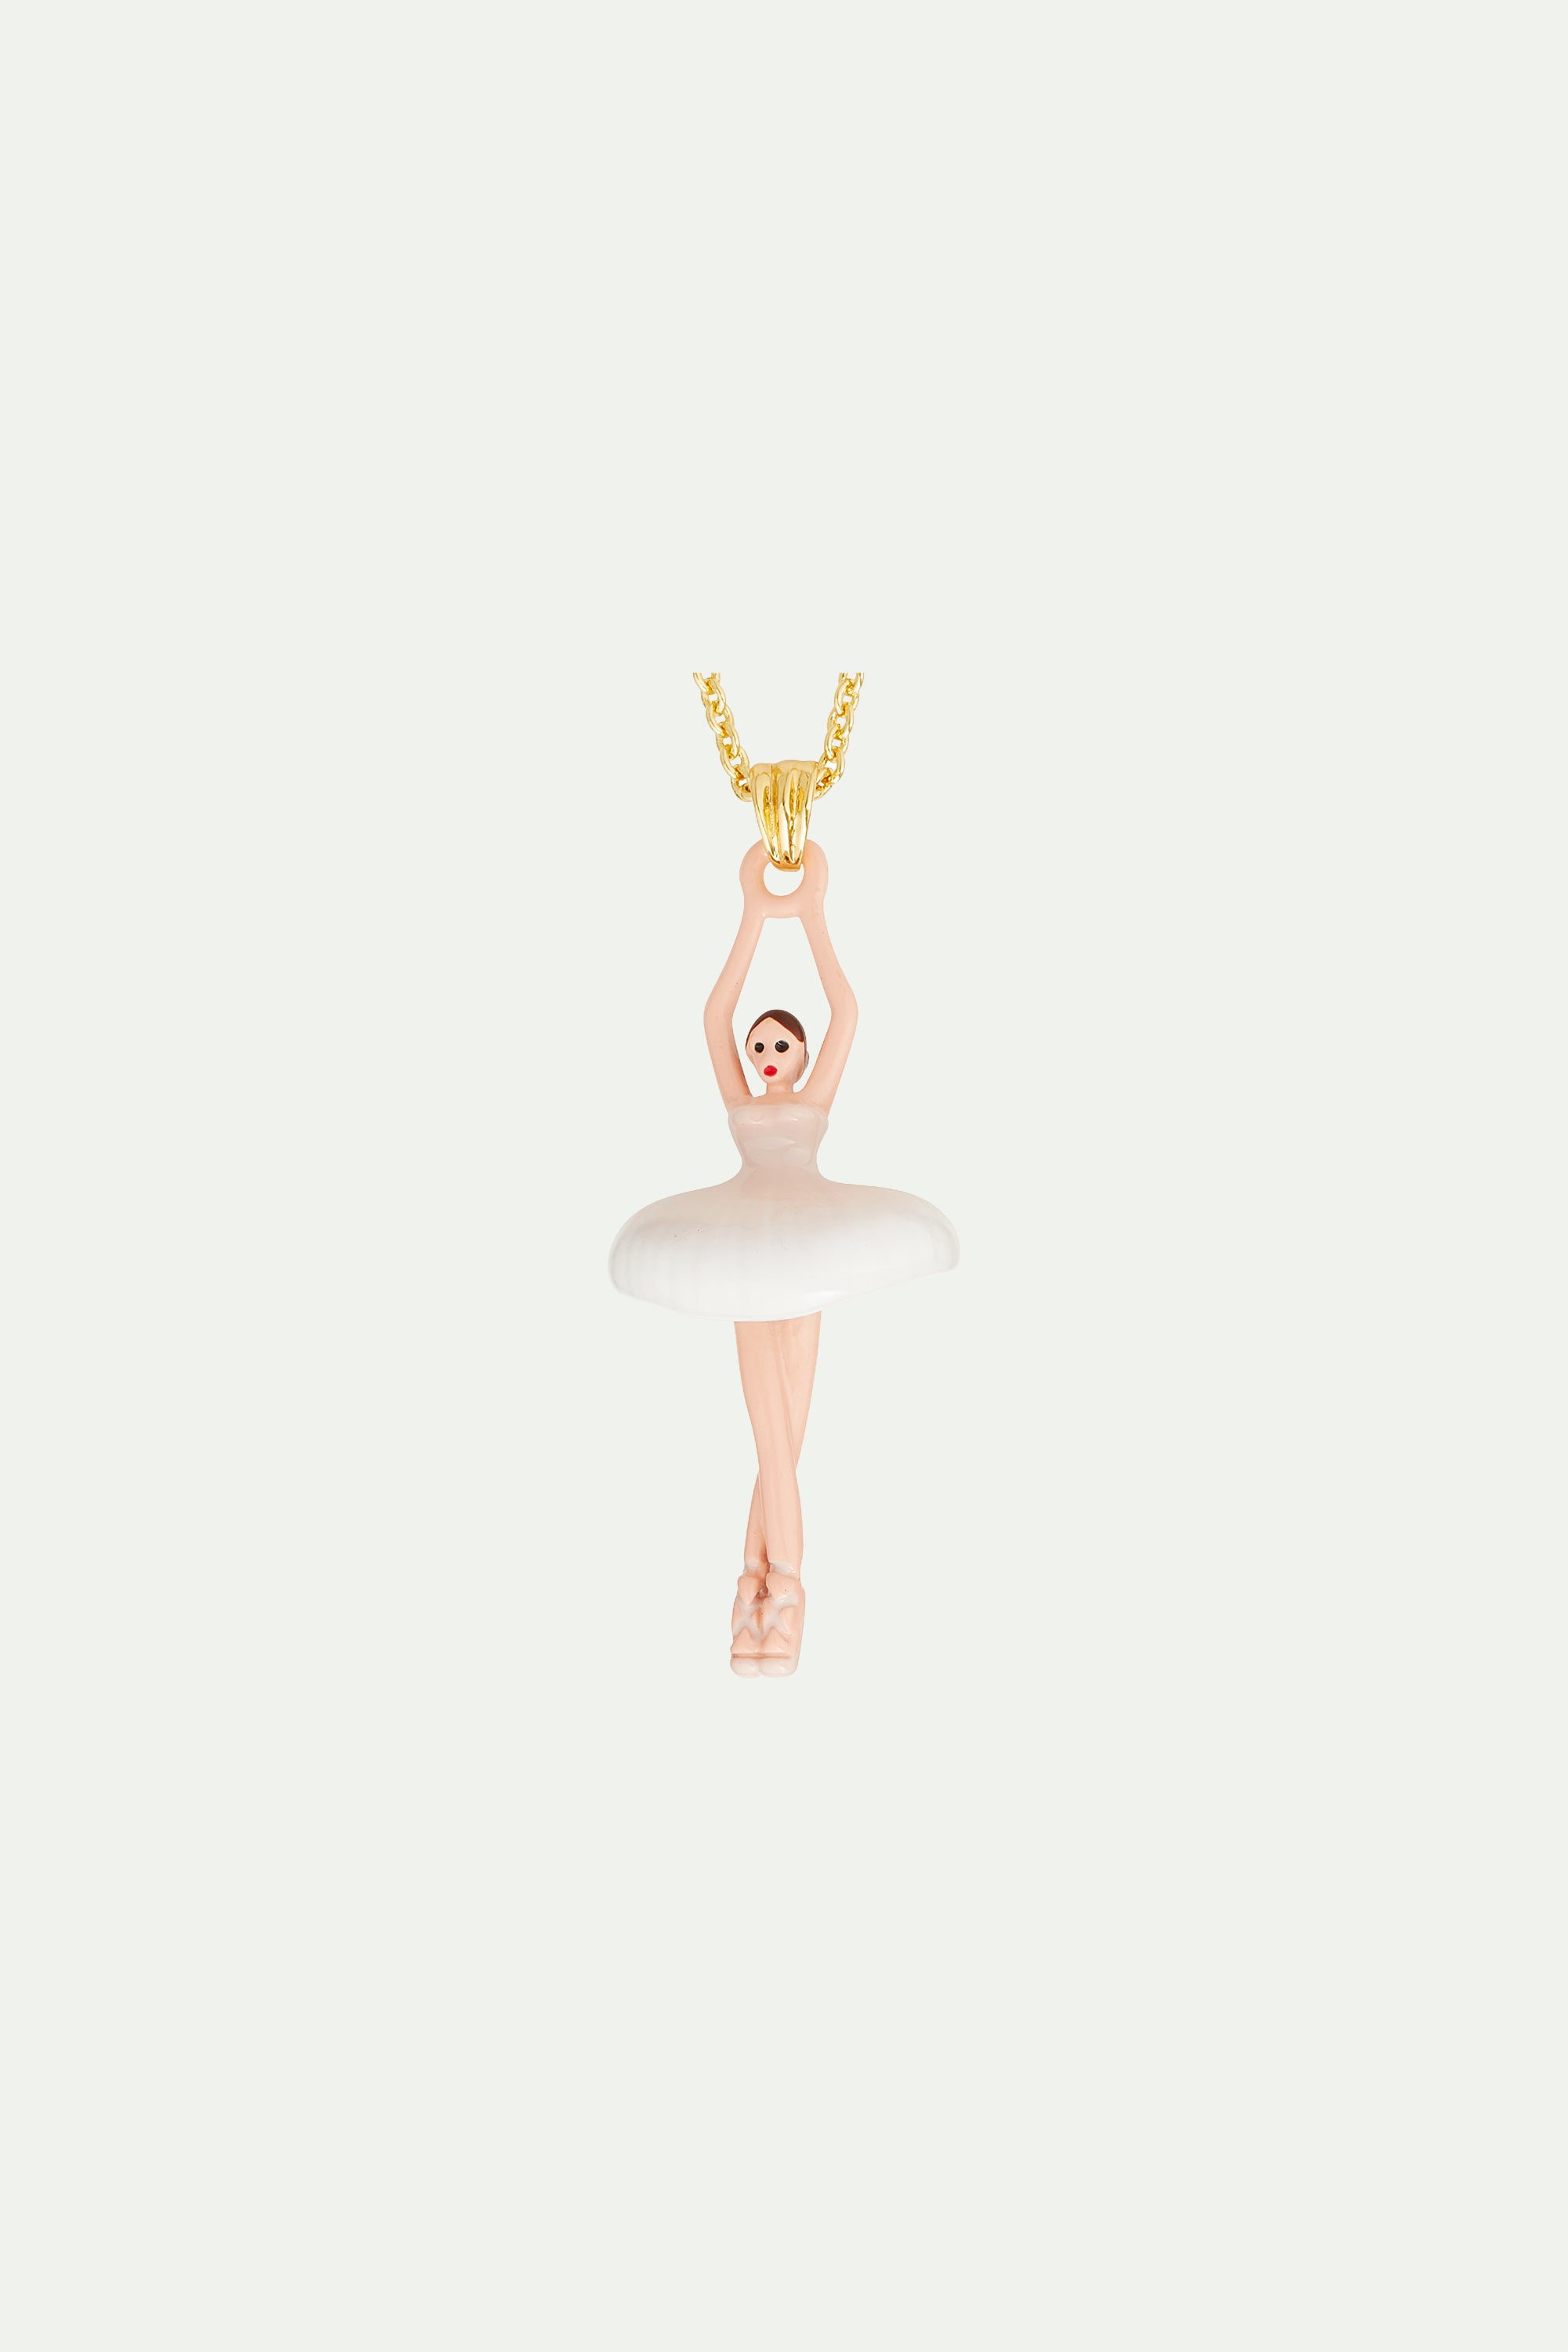 Pale pink and white ballerina pendant necklace